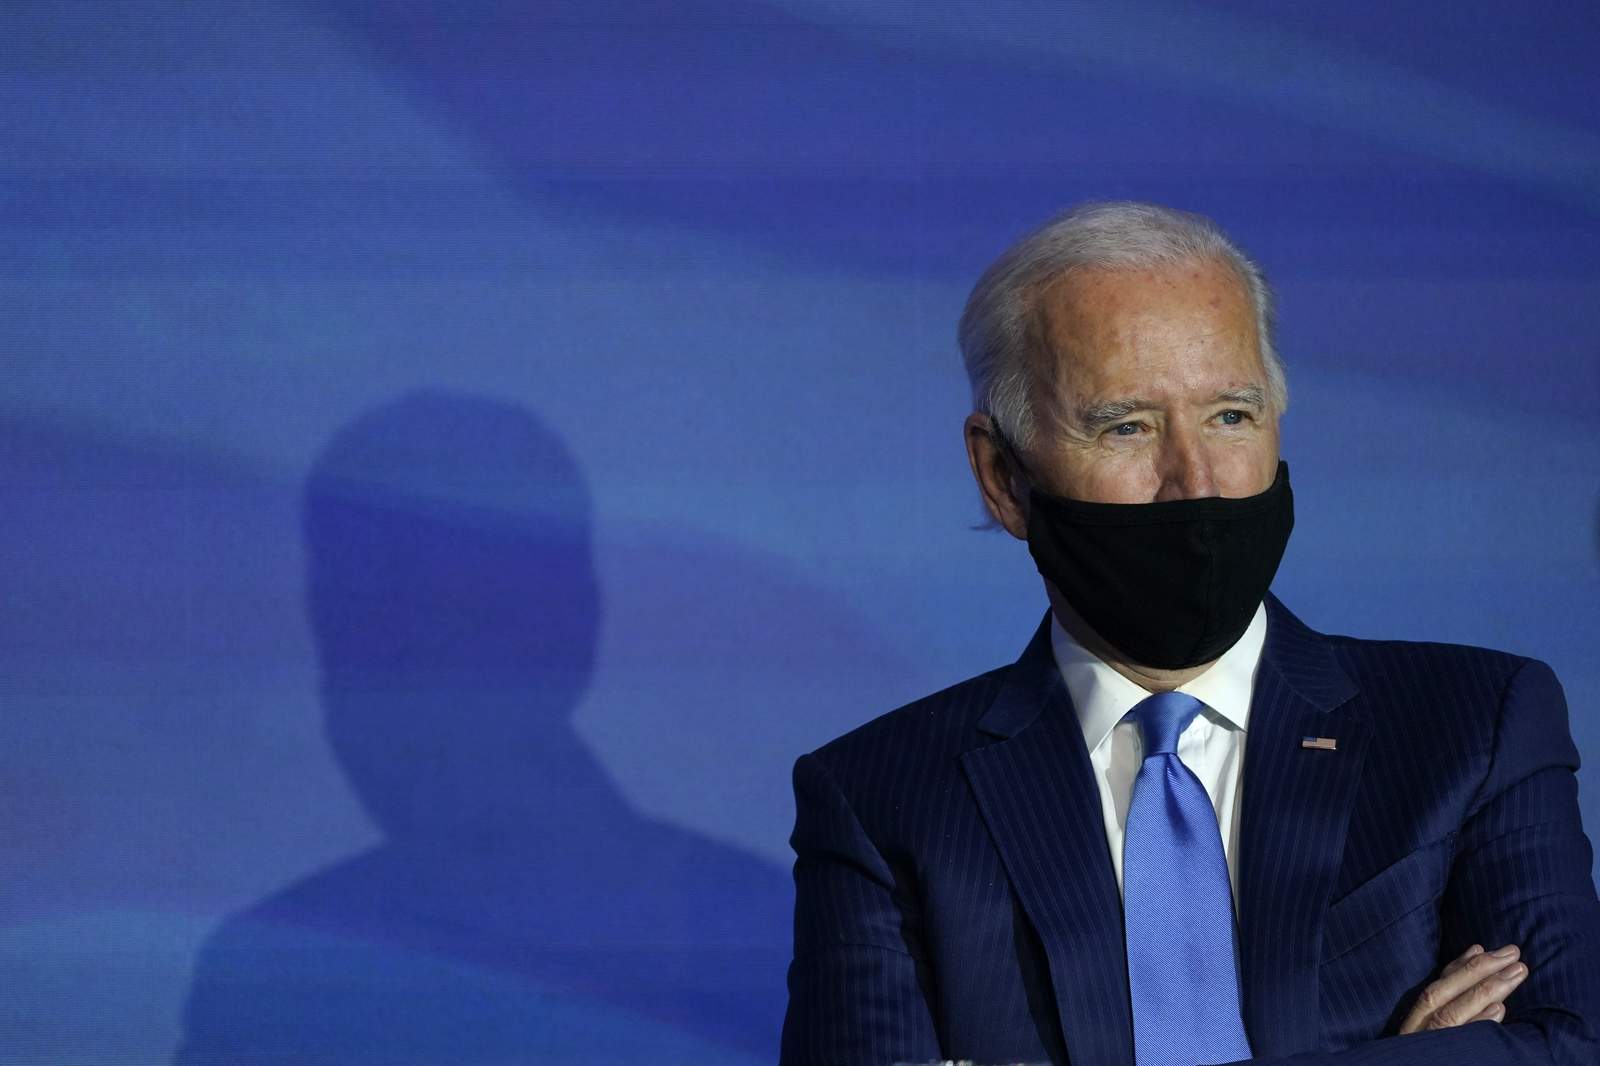 The Latest: Biden says election workers showed courage